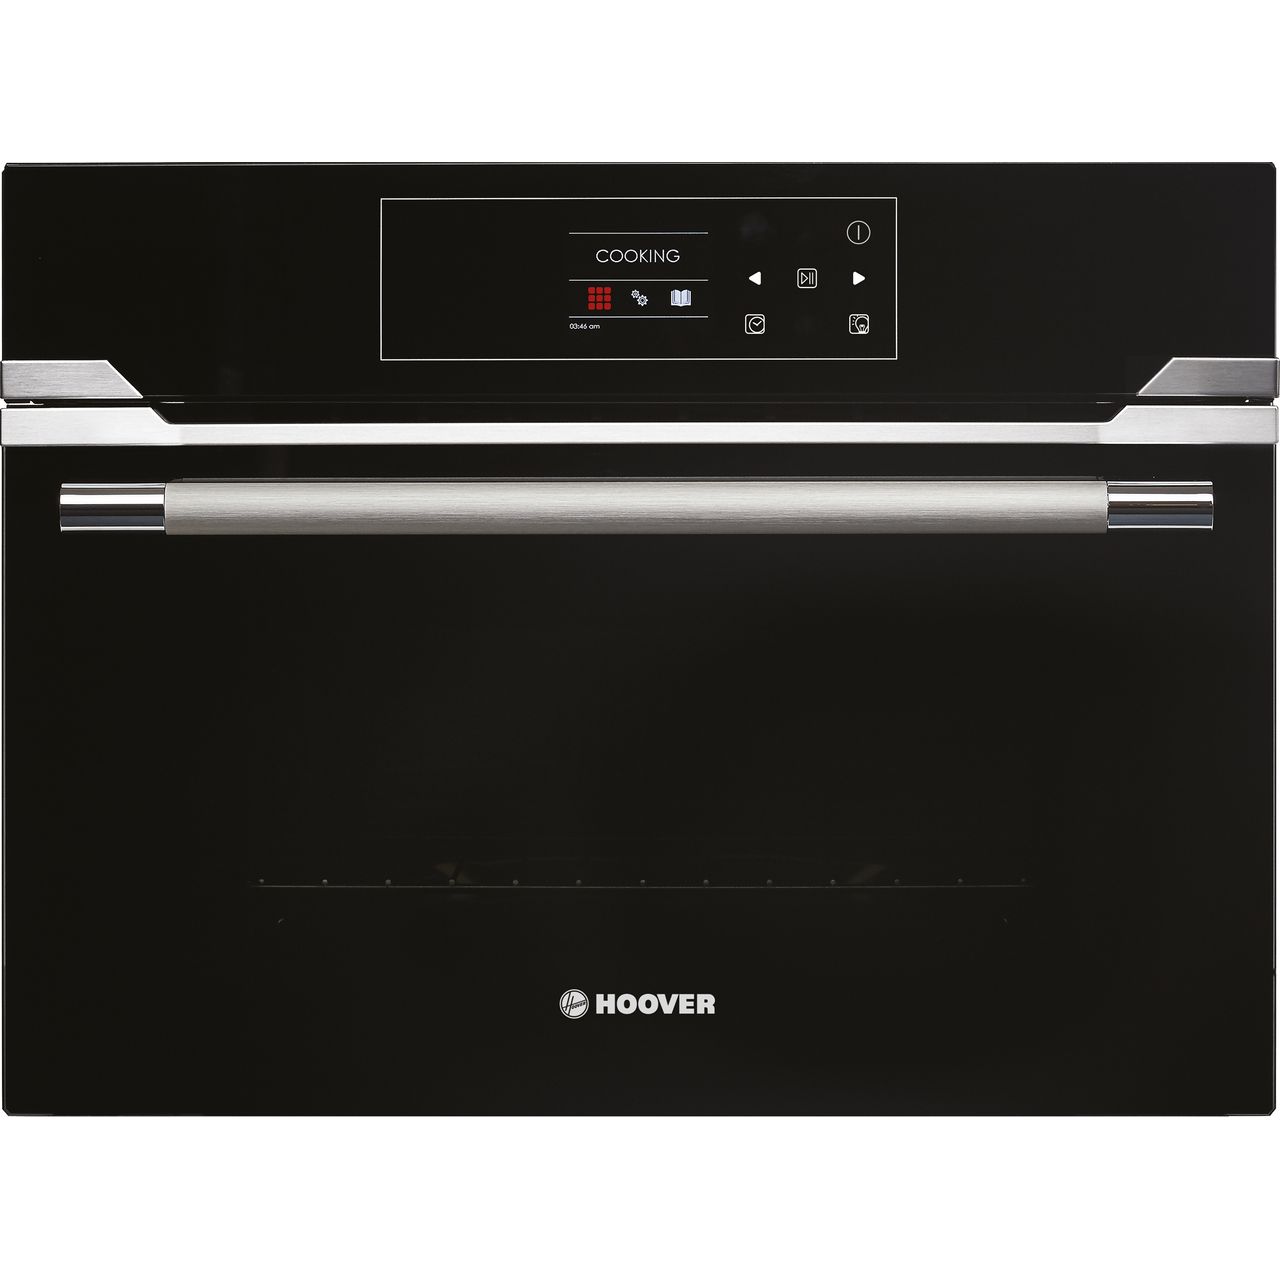 Hoover H-OVEN 700 STEAM HSO450SV Built In Compact Steam Oven Review